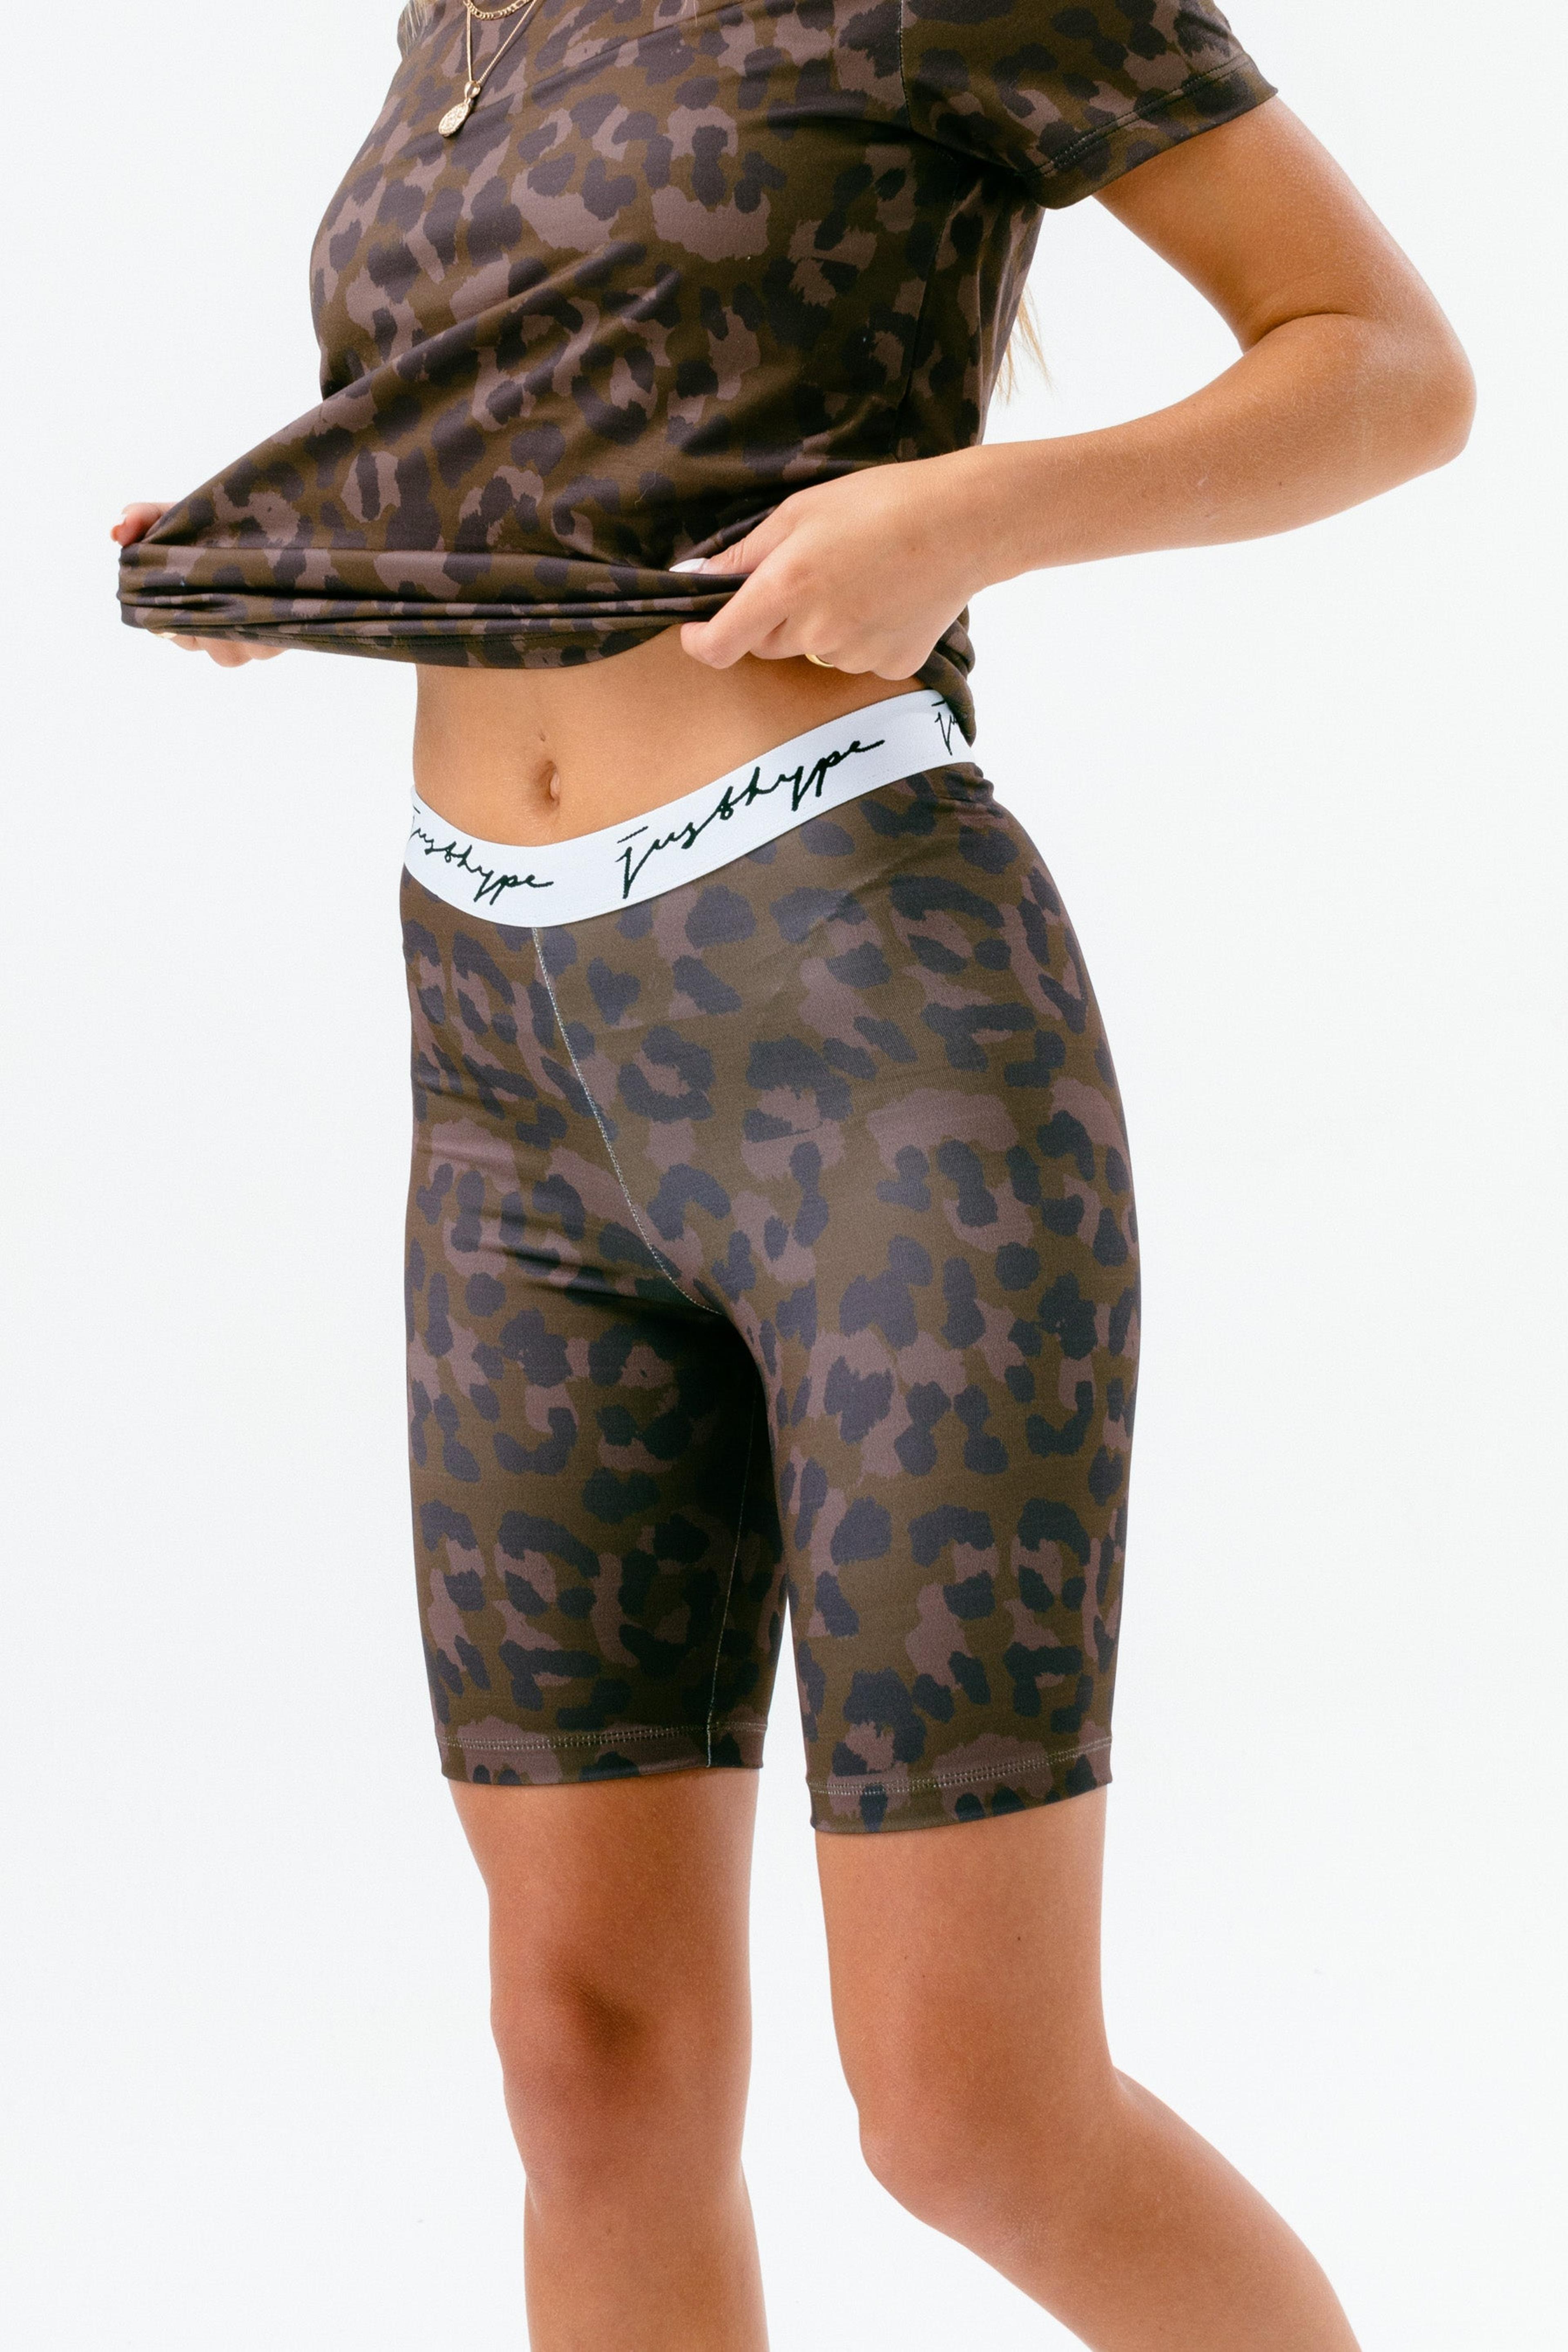 HYPE WOMENS BROWN CHOC LEOPARD TAPE CYCLING SHORTS